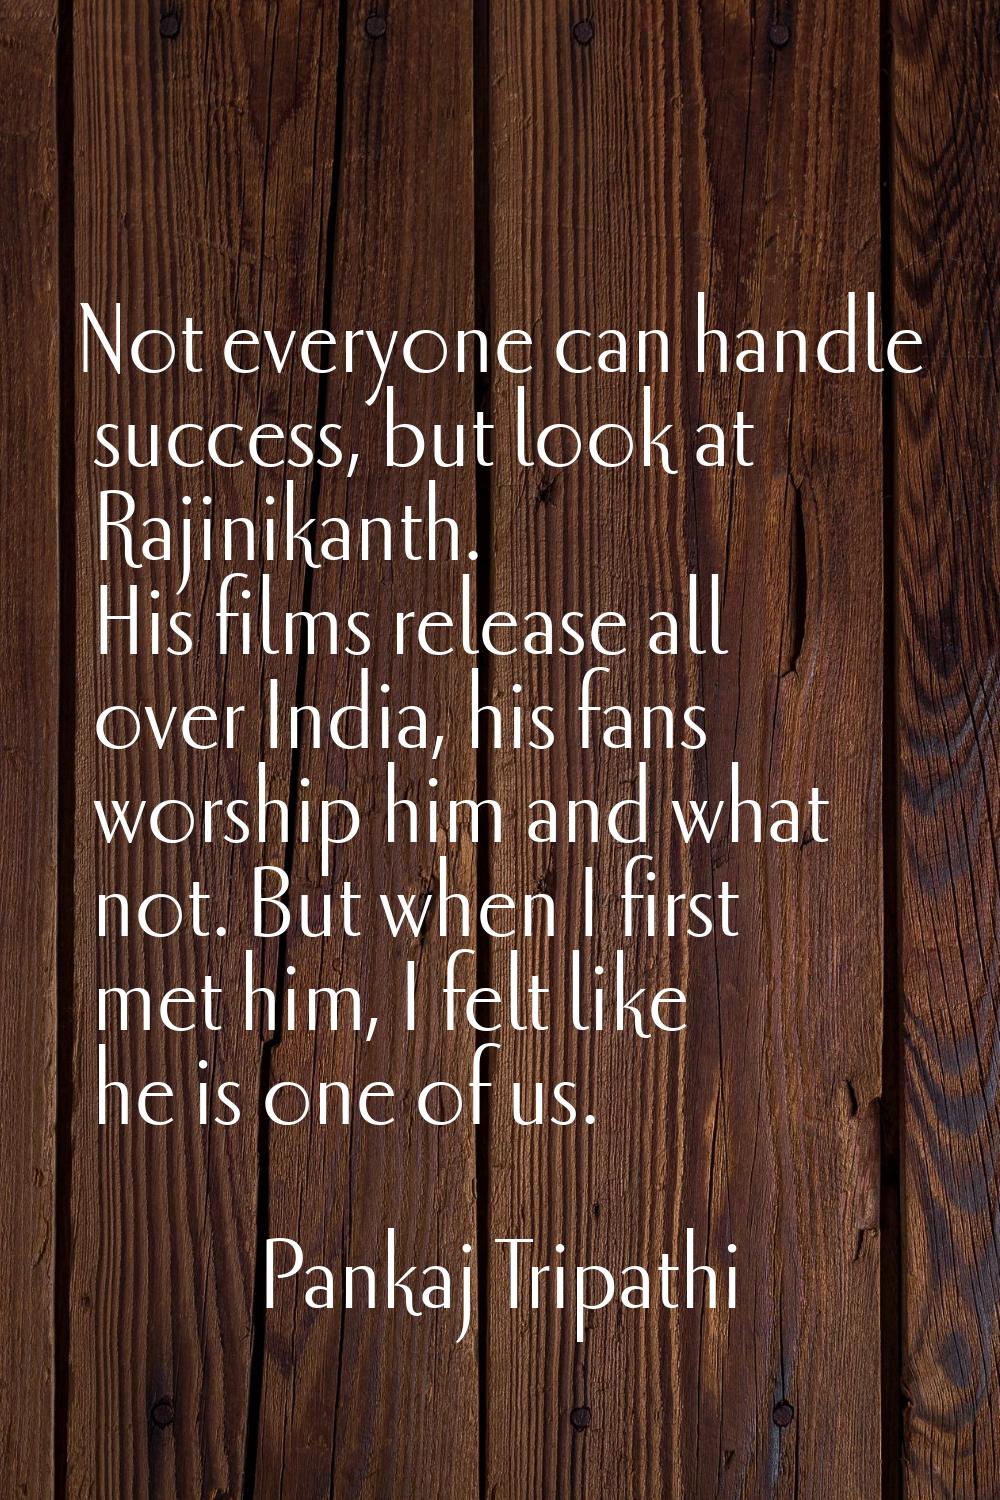 Not everyone can handle success, but look at Rajinikanth. His films release all over India, his fan